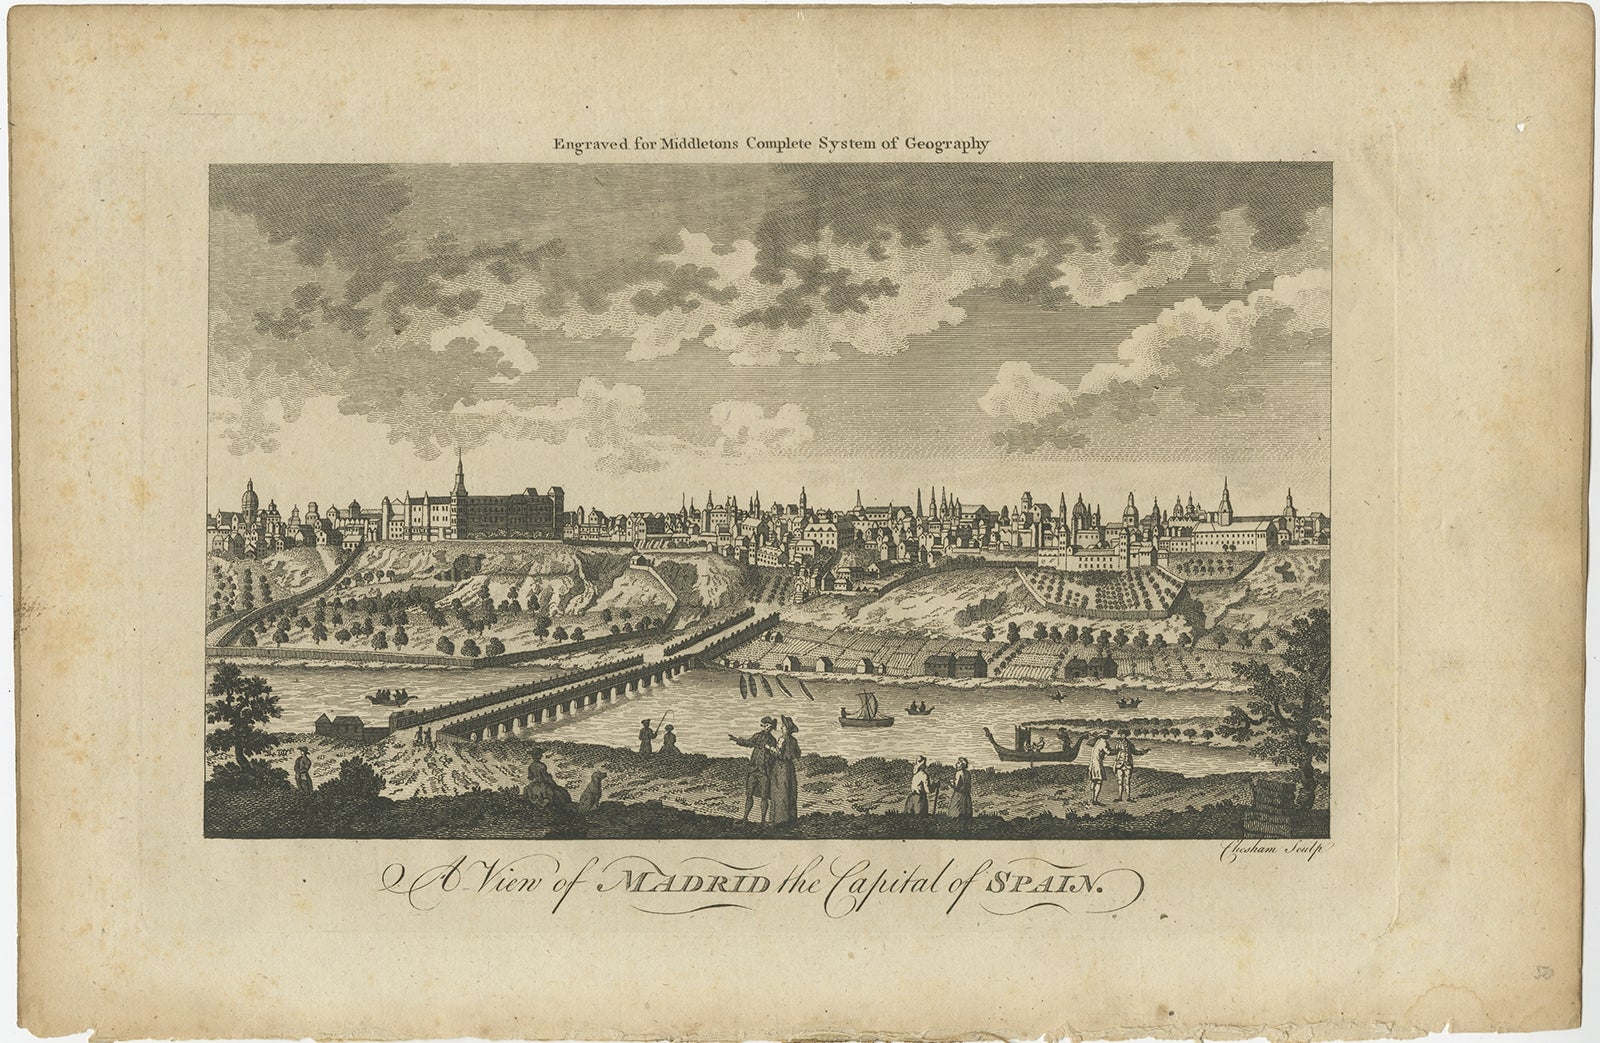 Antique print titled 'A View of Madrid the Capital of Spain'. View of the city of Madrid, Spain. Shows figures in the foreground, pleasure boats, a bridge, the Royal Palace, parkland, vegetable plots, assorted buildings and churches. Engraved for